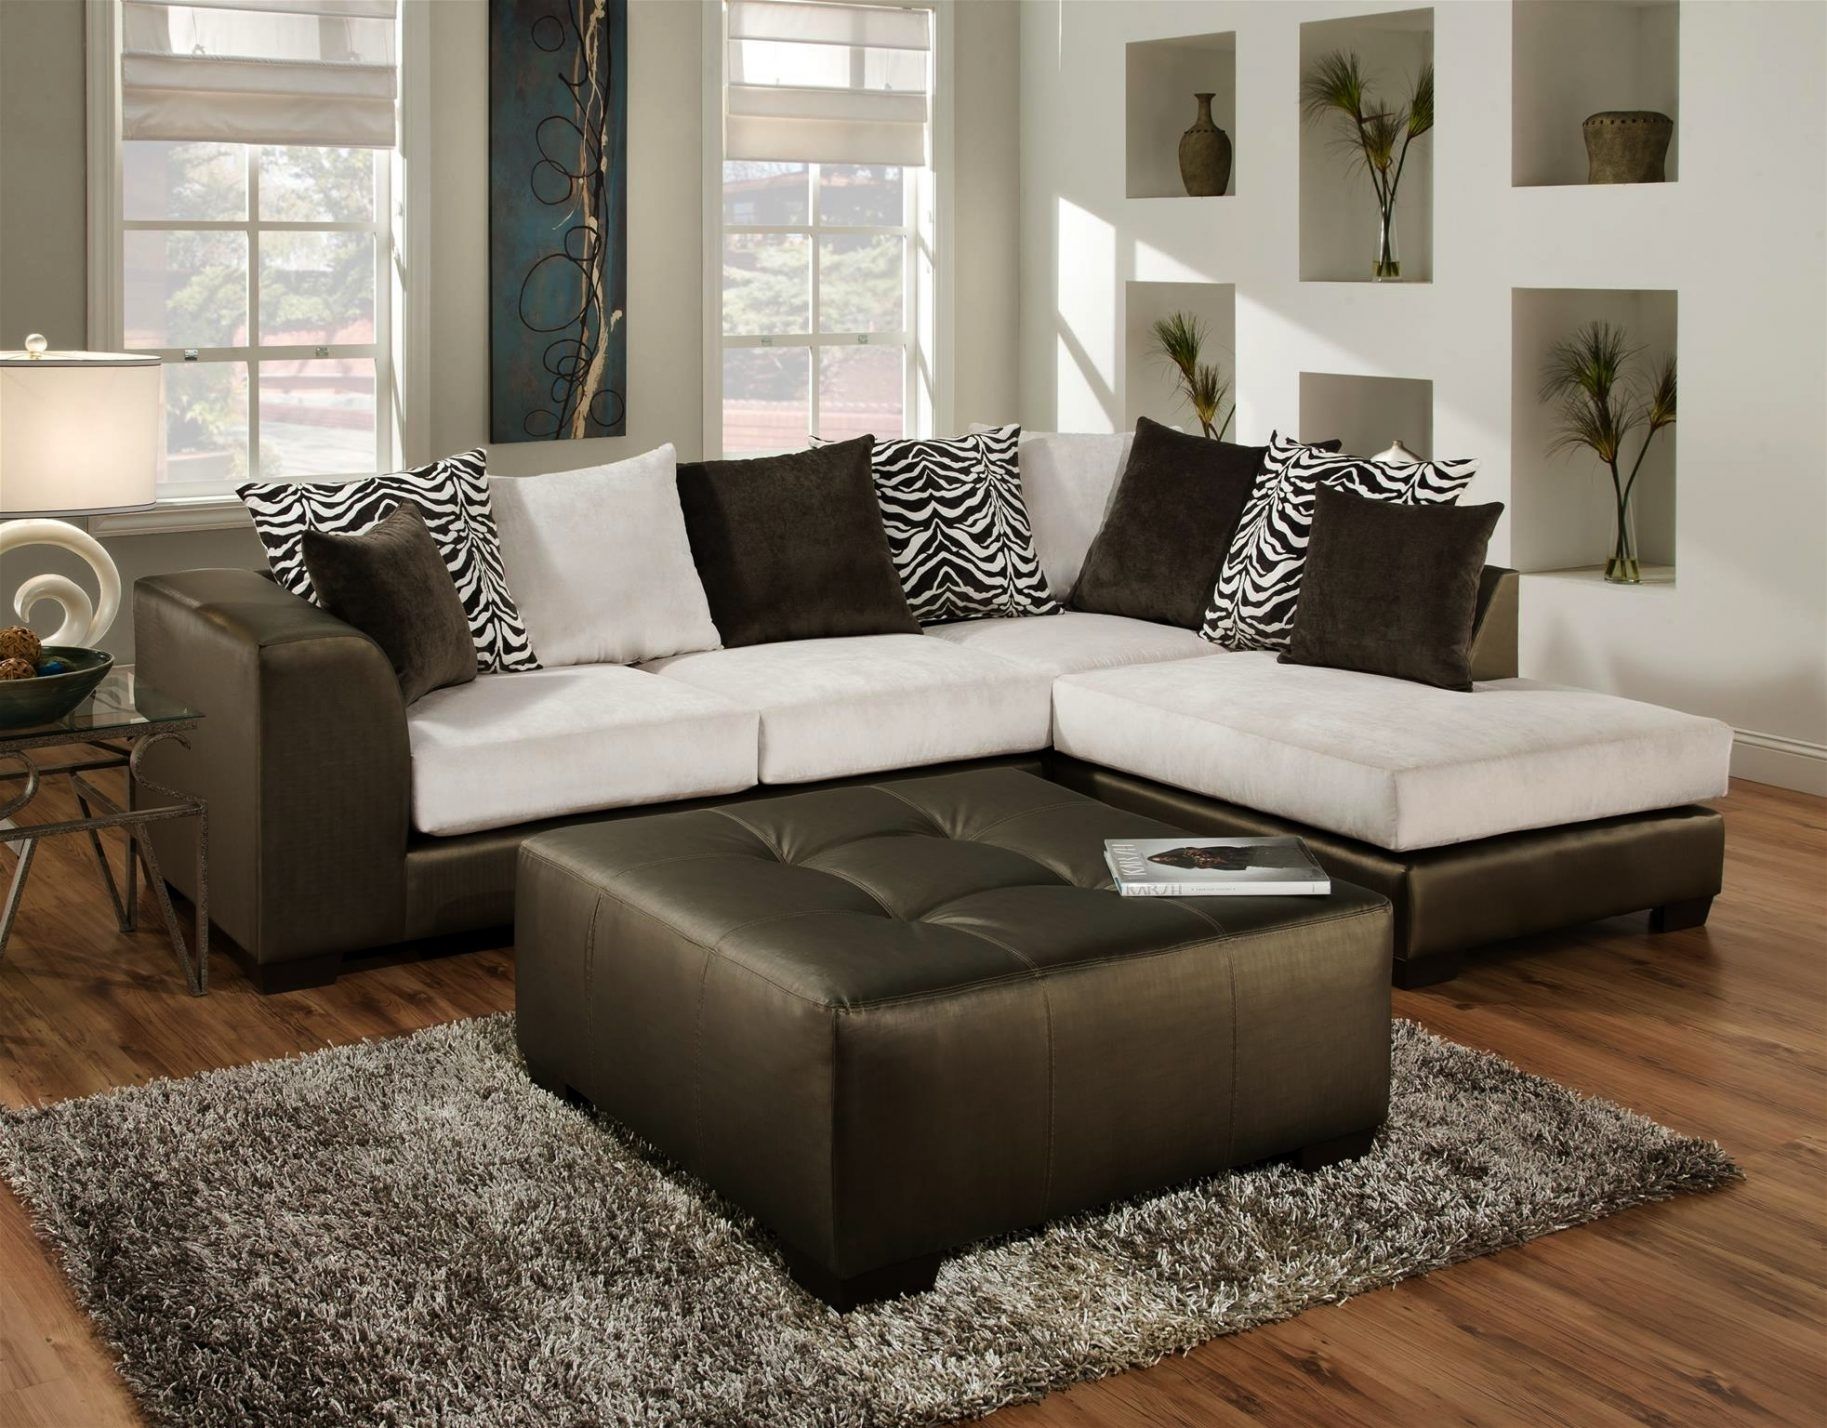 New Sectional Sofas Tampa 14 In 10 Foot Sectional Sofa With Intended With Regard To Tampa Sectional Sofas (View 5 of 10)